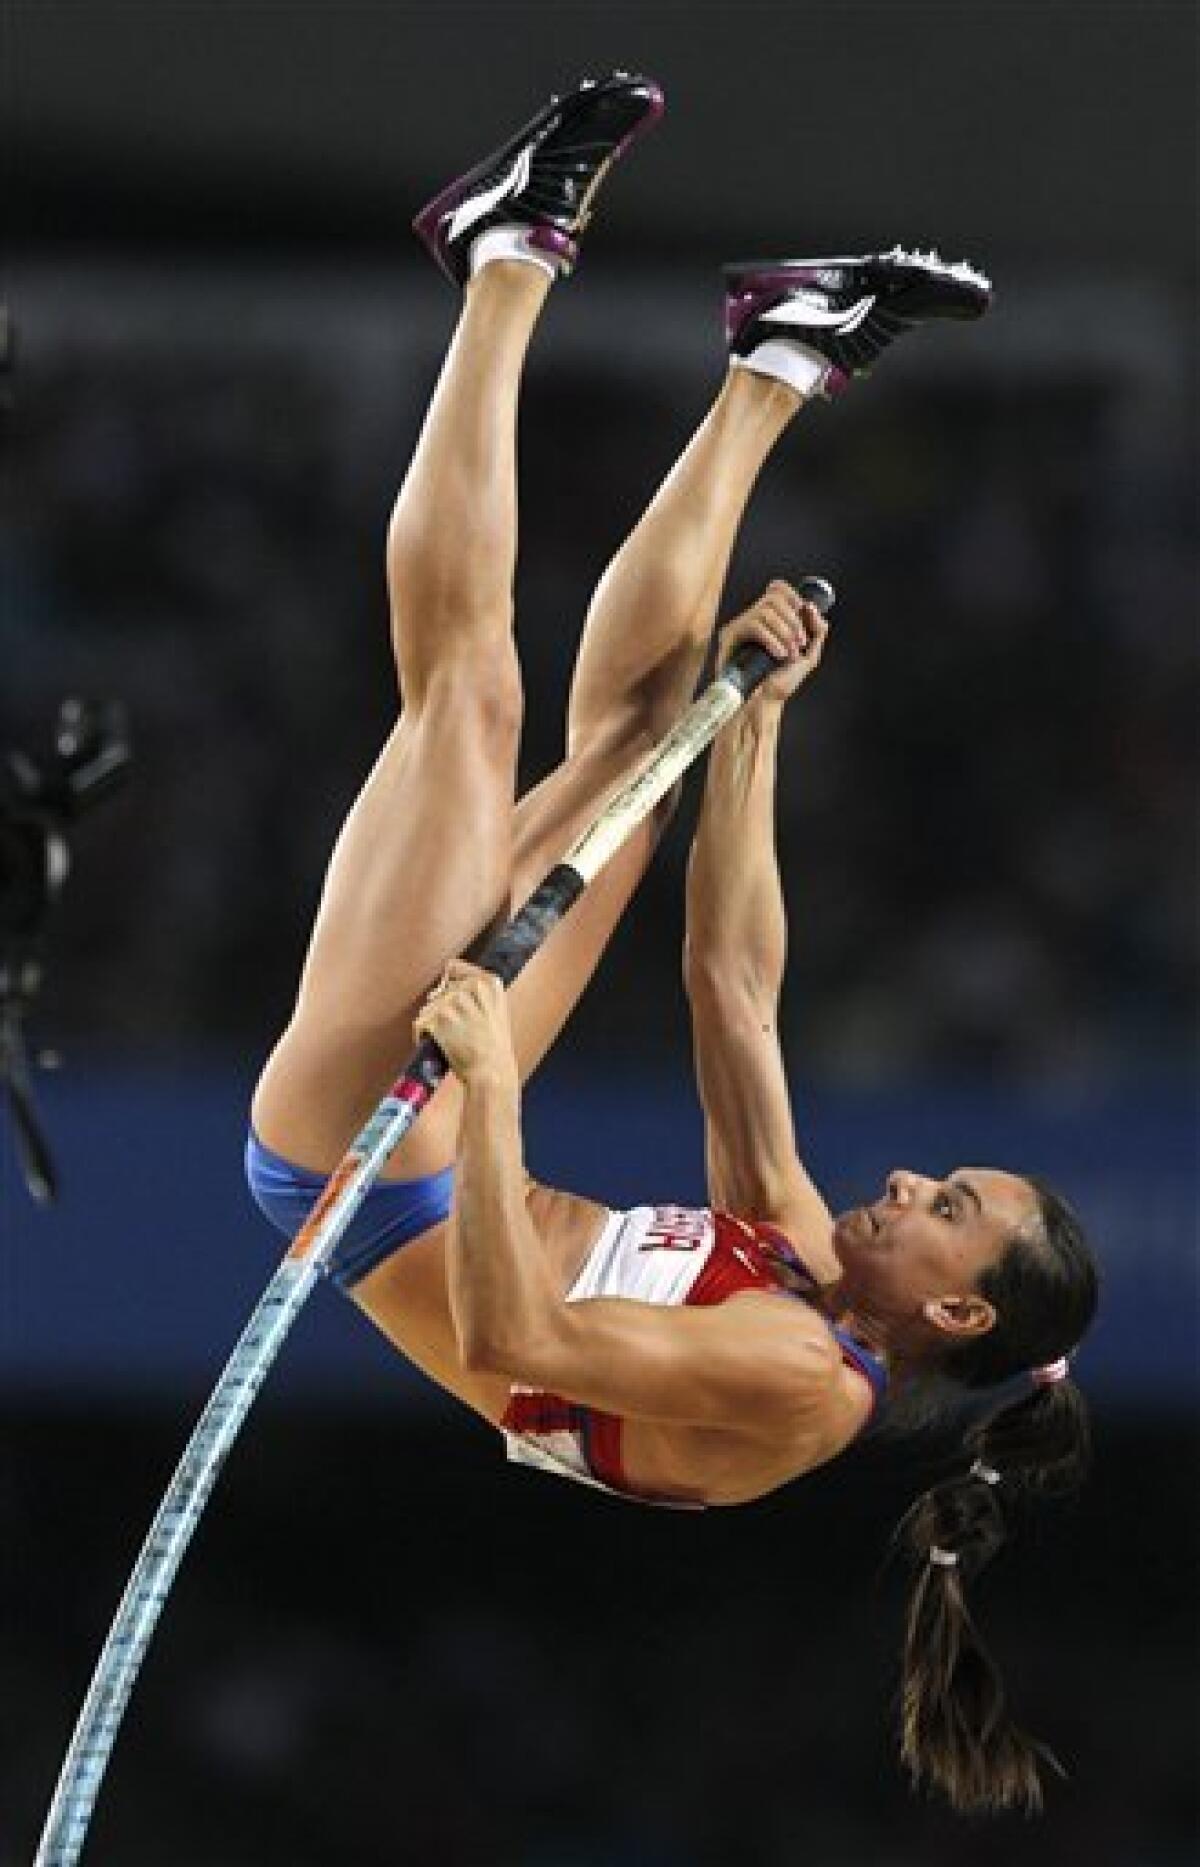 Russia's Yelena Isinbayeva makes an attempt in the Women's Pole Vault final at the World Athletics Championships in Daegu, South Korea, Tuesday, Aug. 30, 2011. (AP Photo/Kin Cheung)